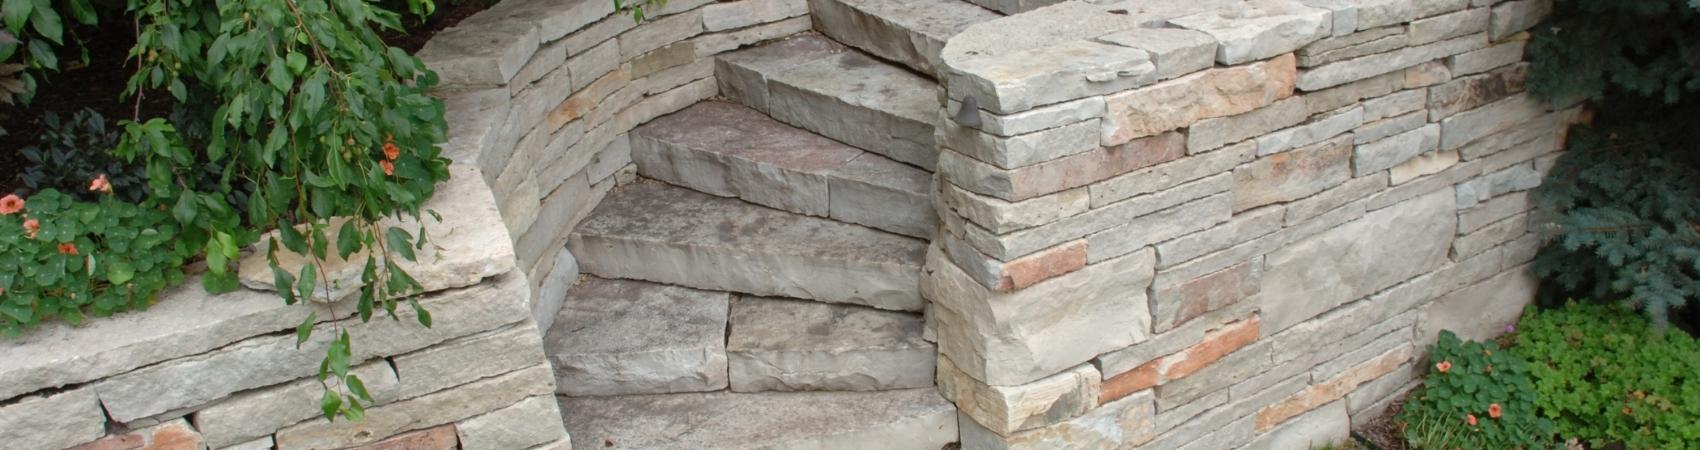 retaining wall stone and steps